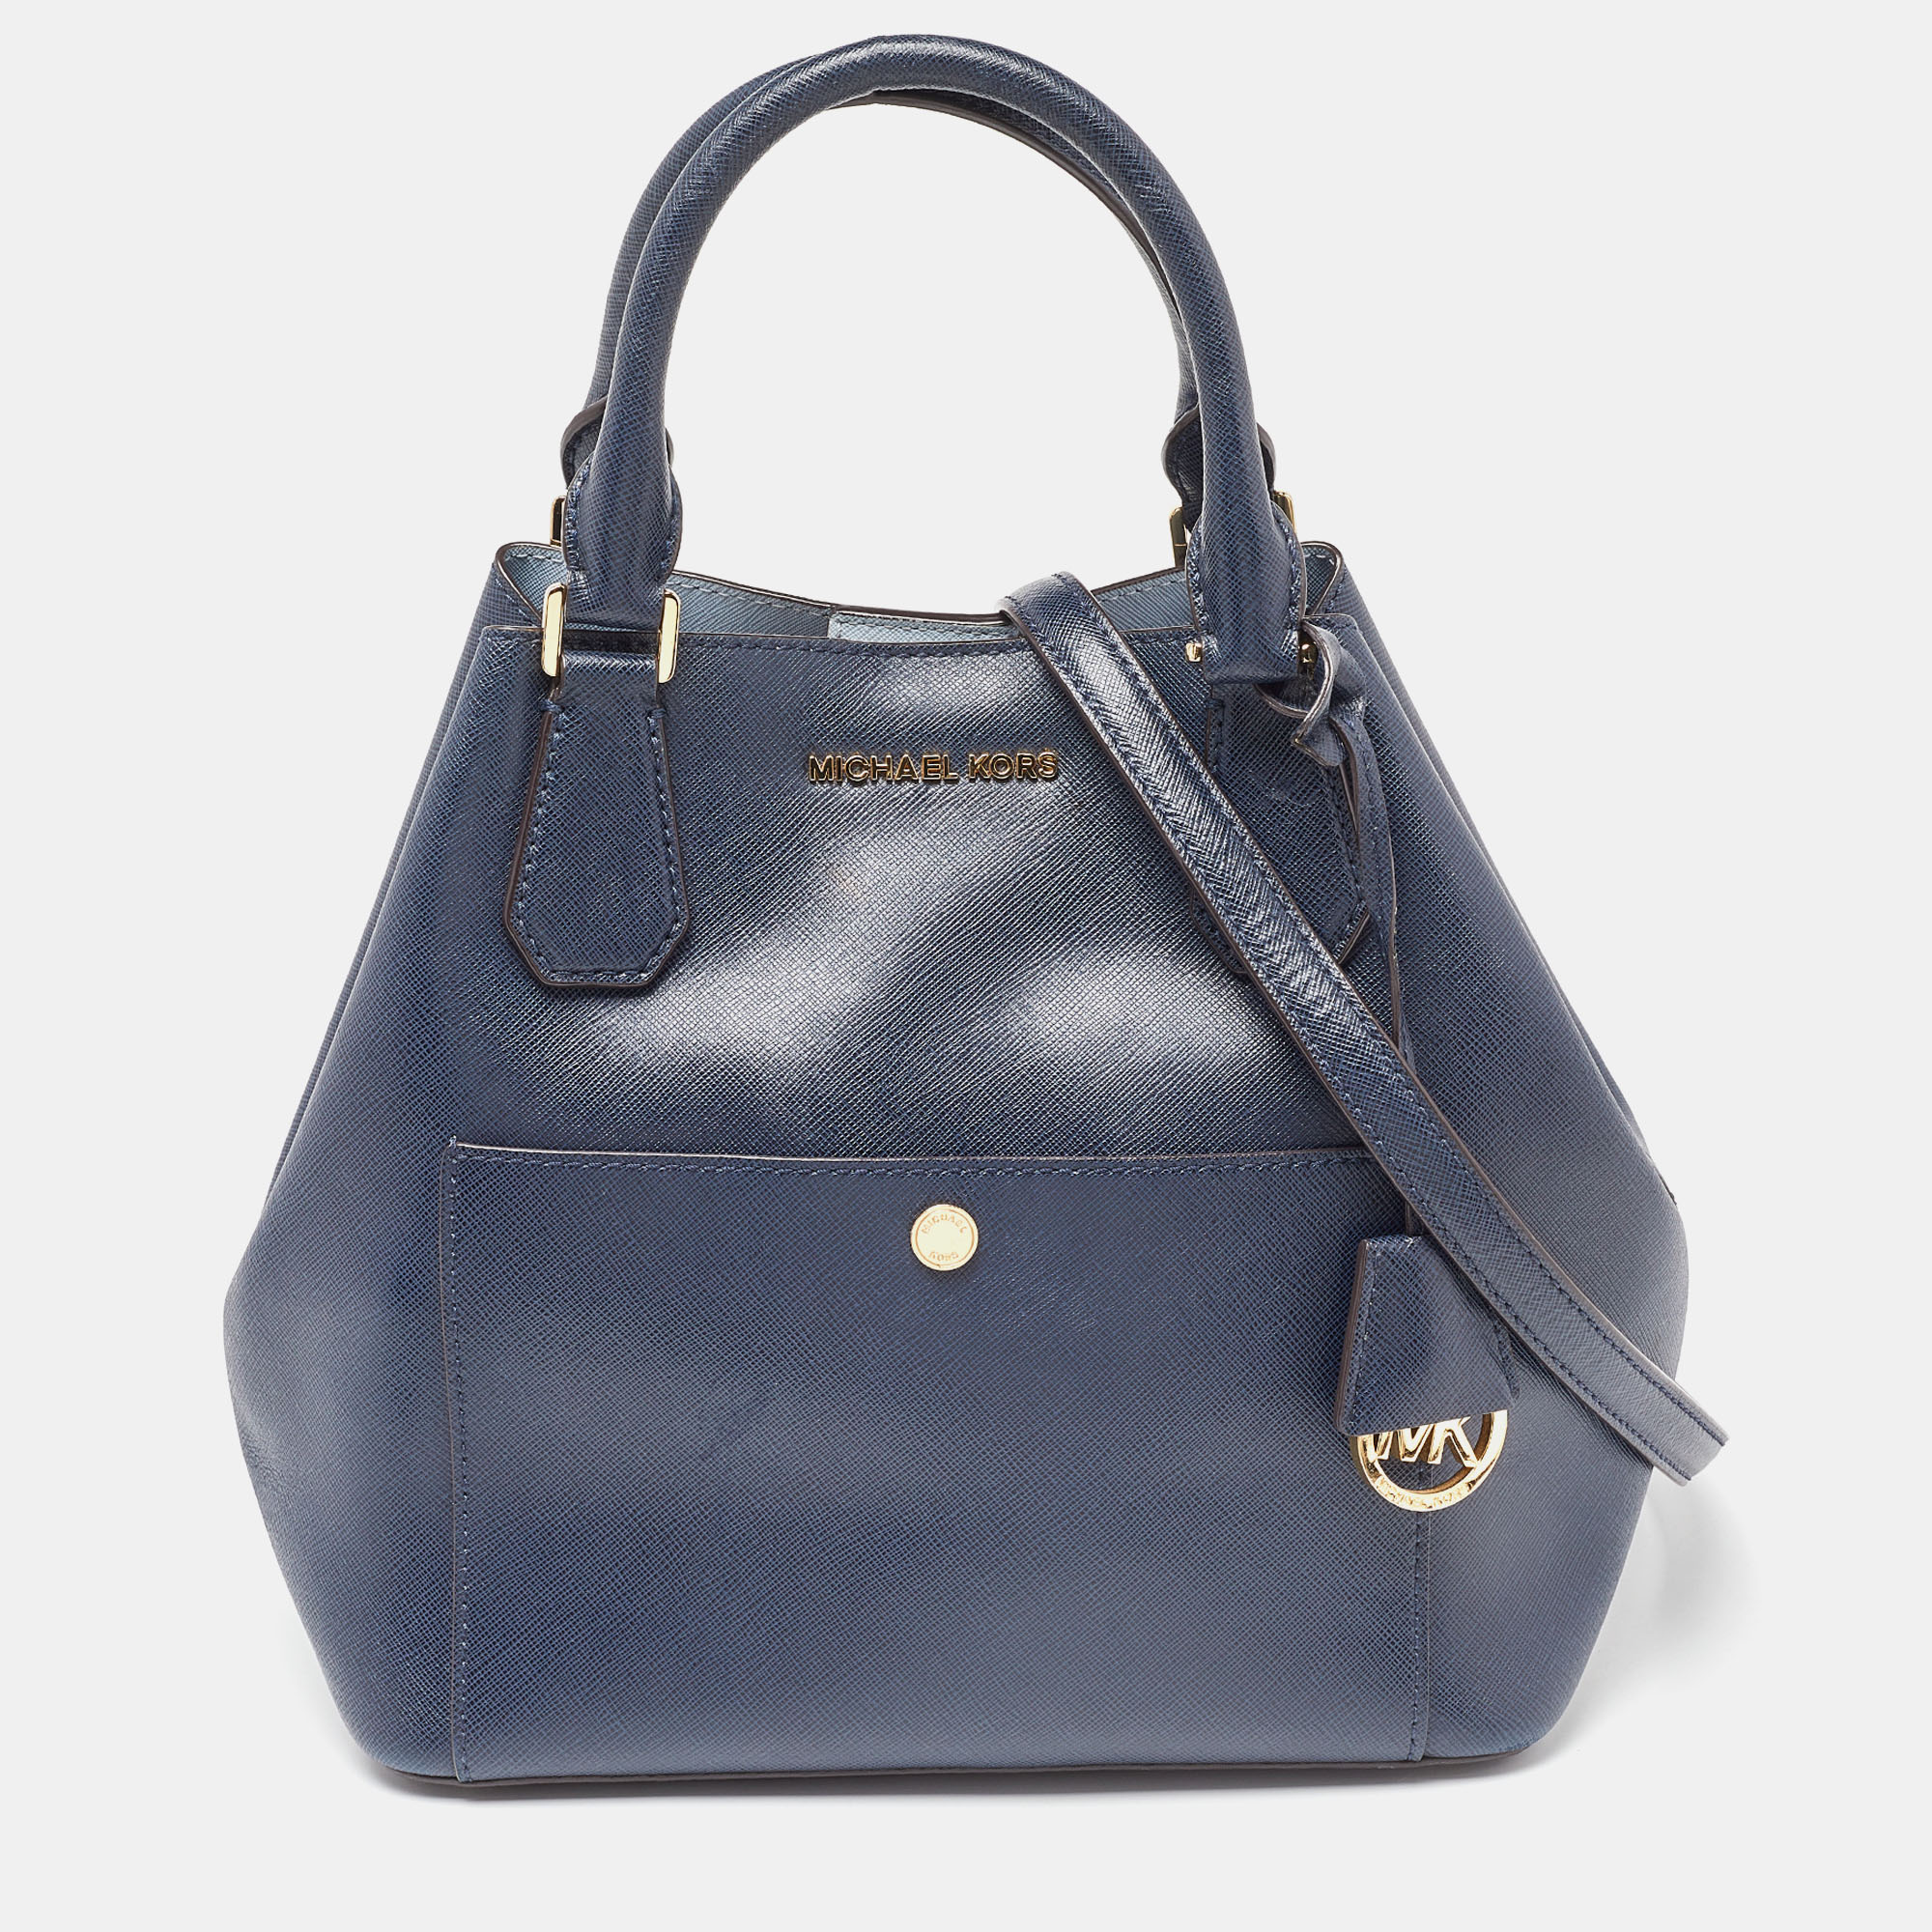 Michael kors blue leather greenwich tote